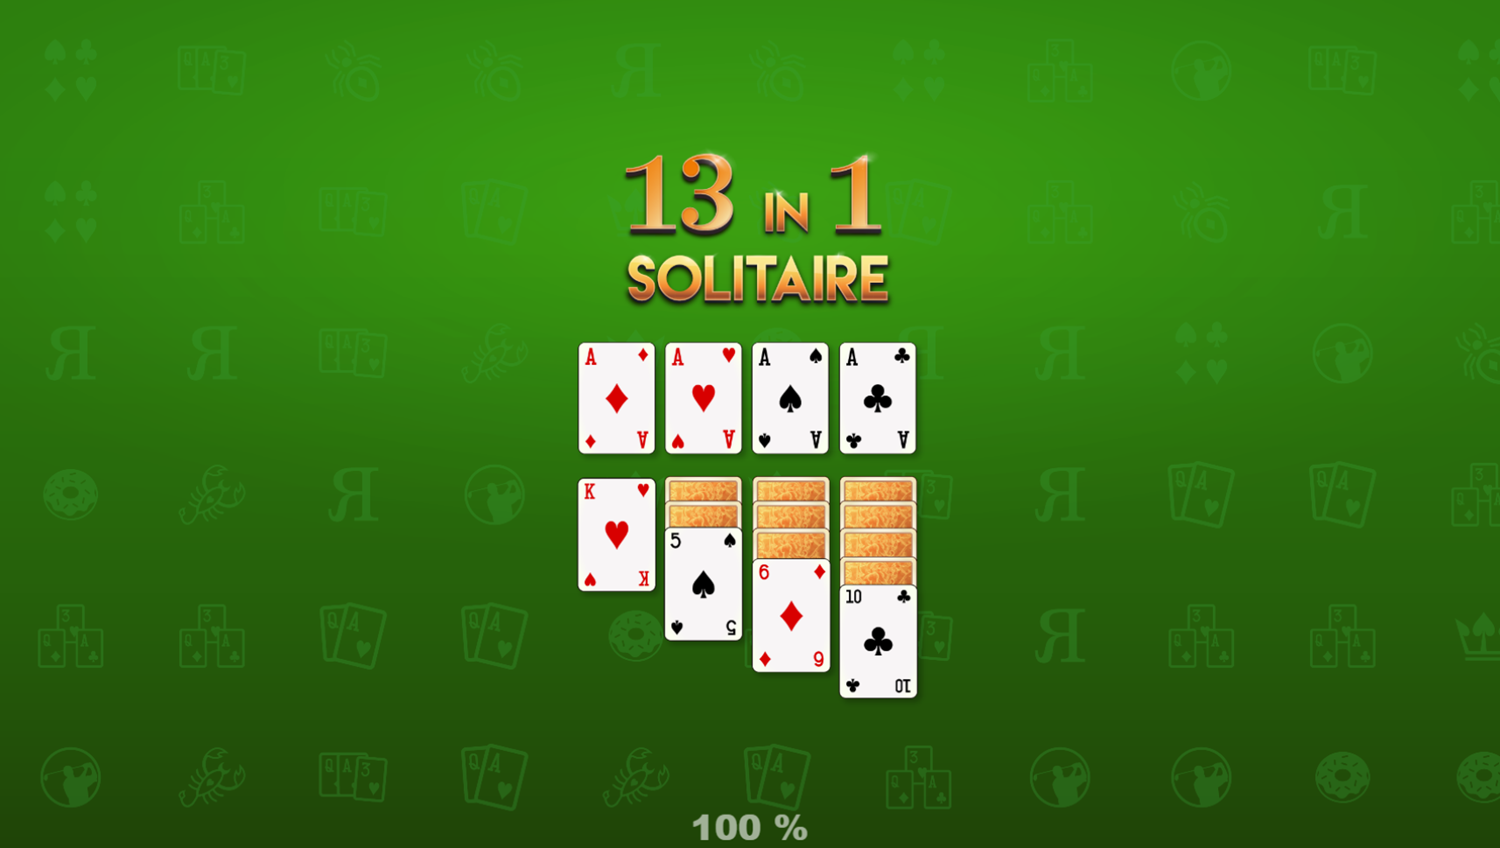 Solitaire 13 In 1 Collection Game Welcome Screen Screenshot.